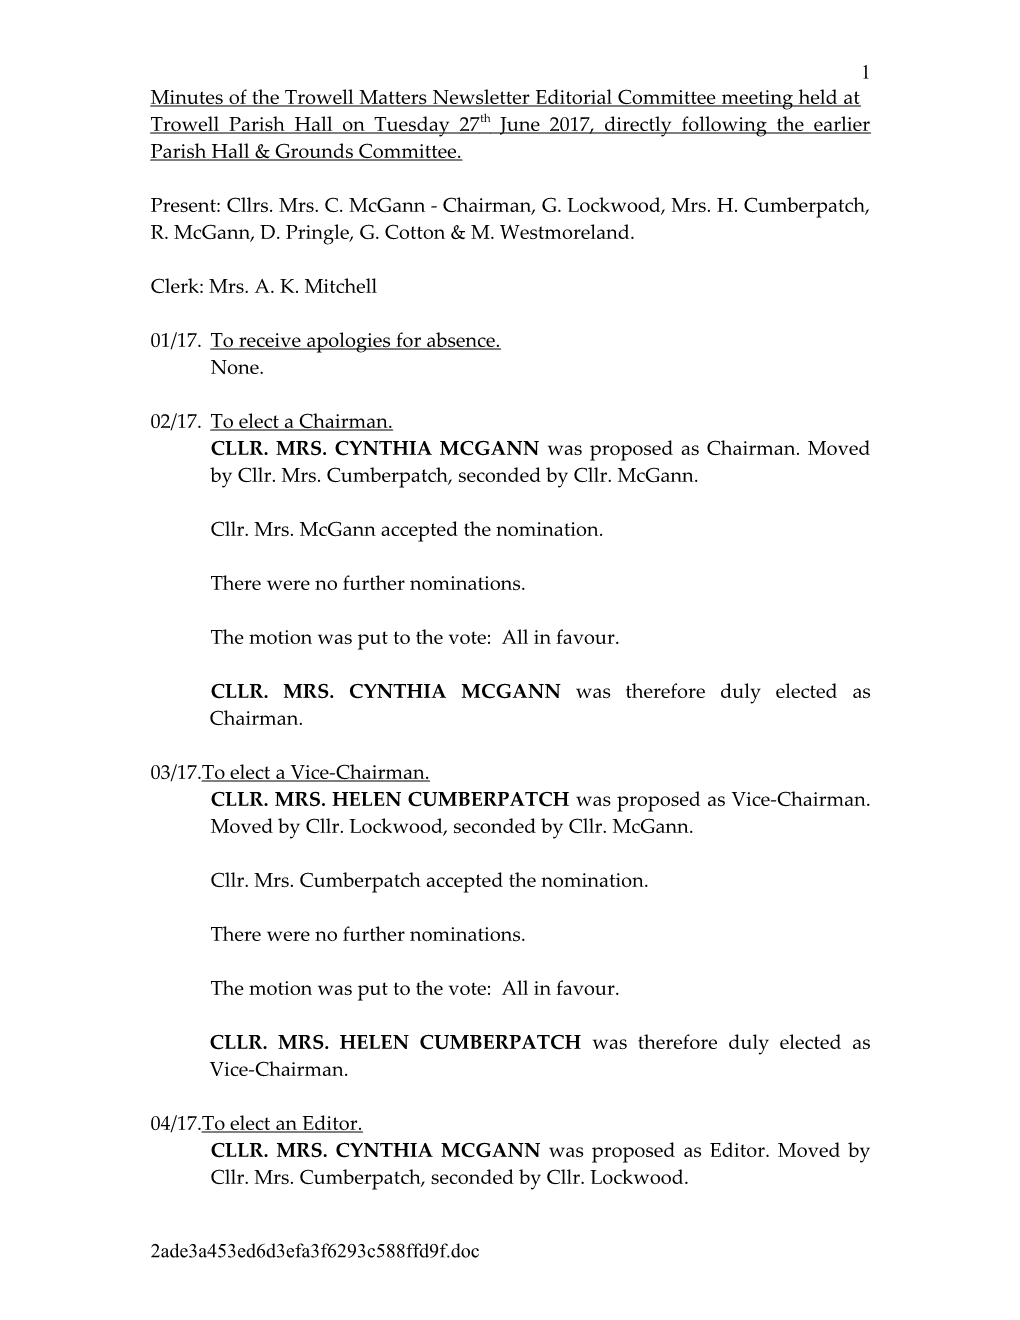 Minutes of a Meeting Held at Trowell Parish Hall on Tuesday 2Nd December 2003, at 7